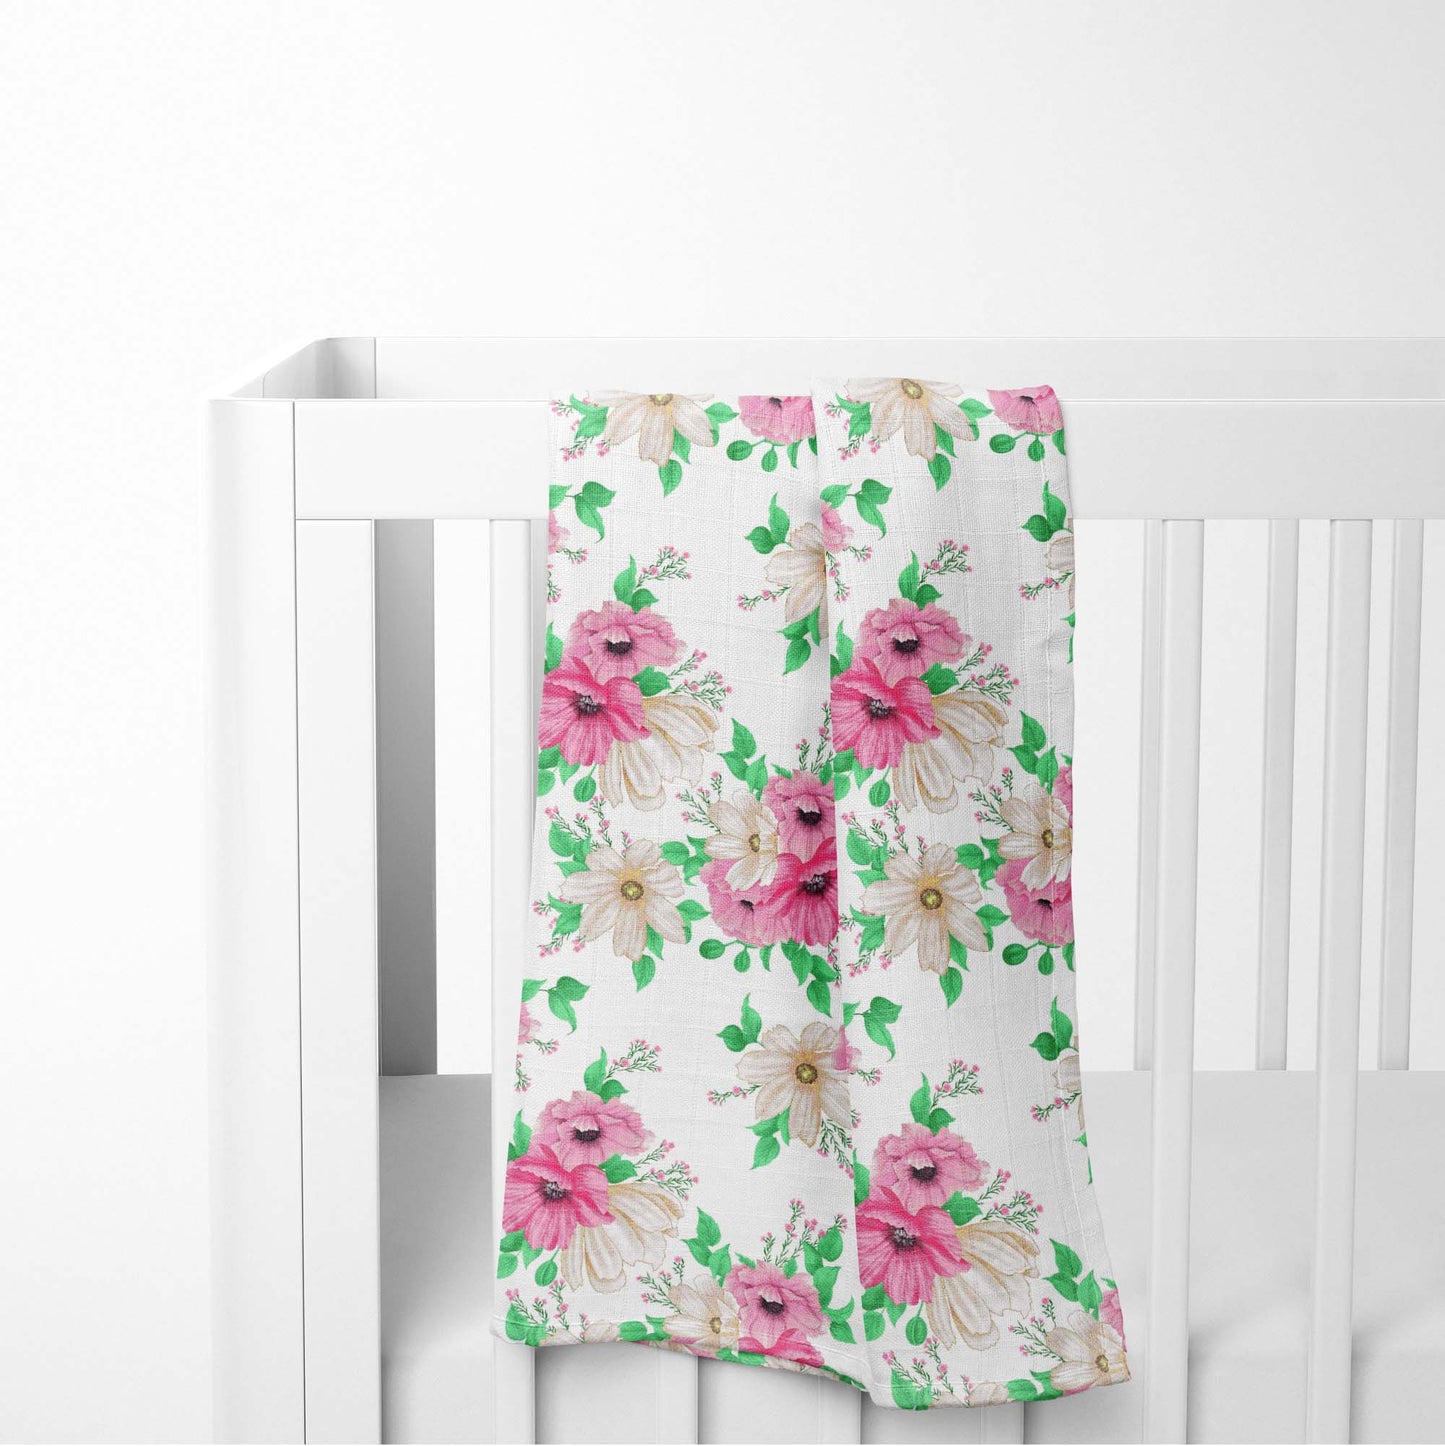 Florals 100% Cotton Muslin Swaddles, Colorful, Pack Of 5